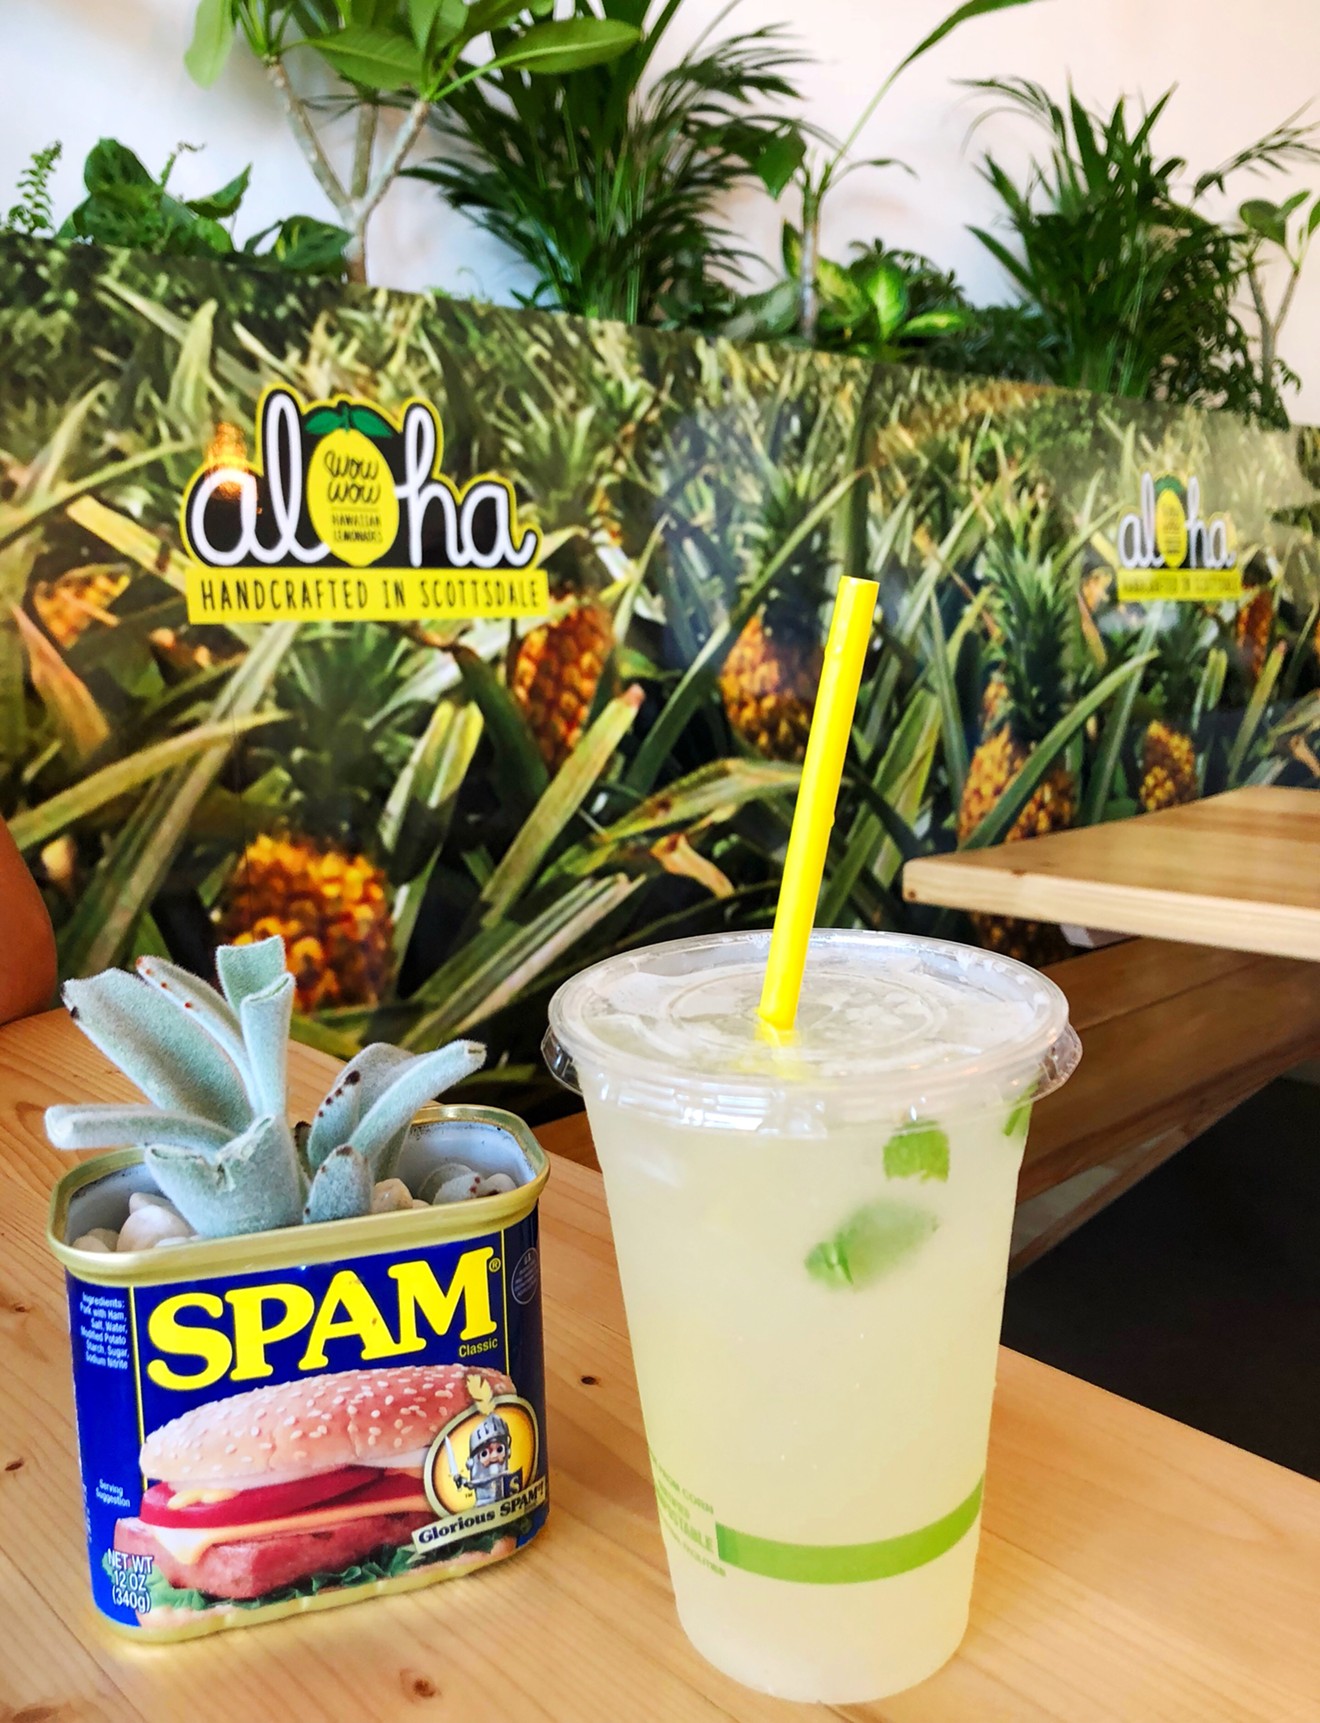 SPAM tins are just for decoration, but the sparkling mojito limeade is for real.